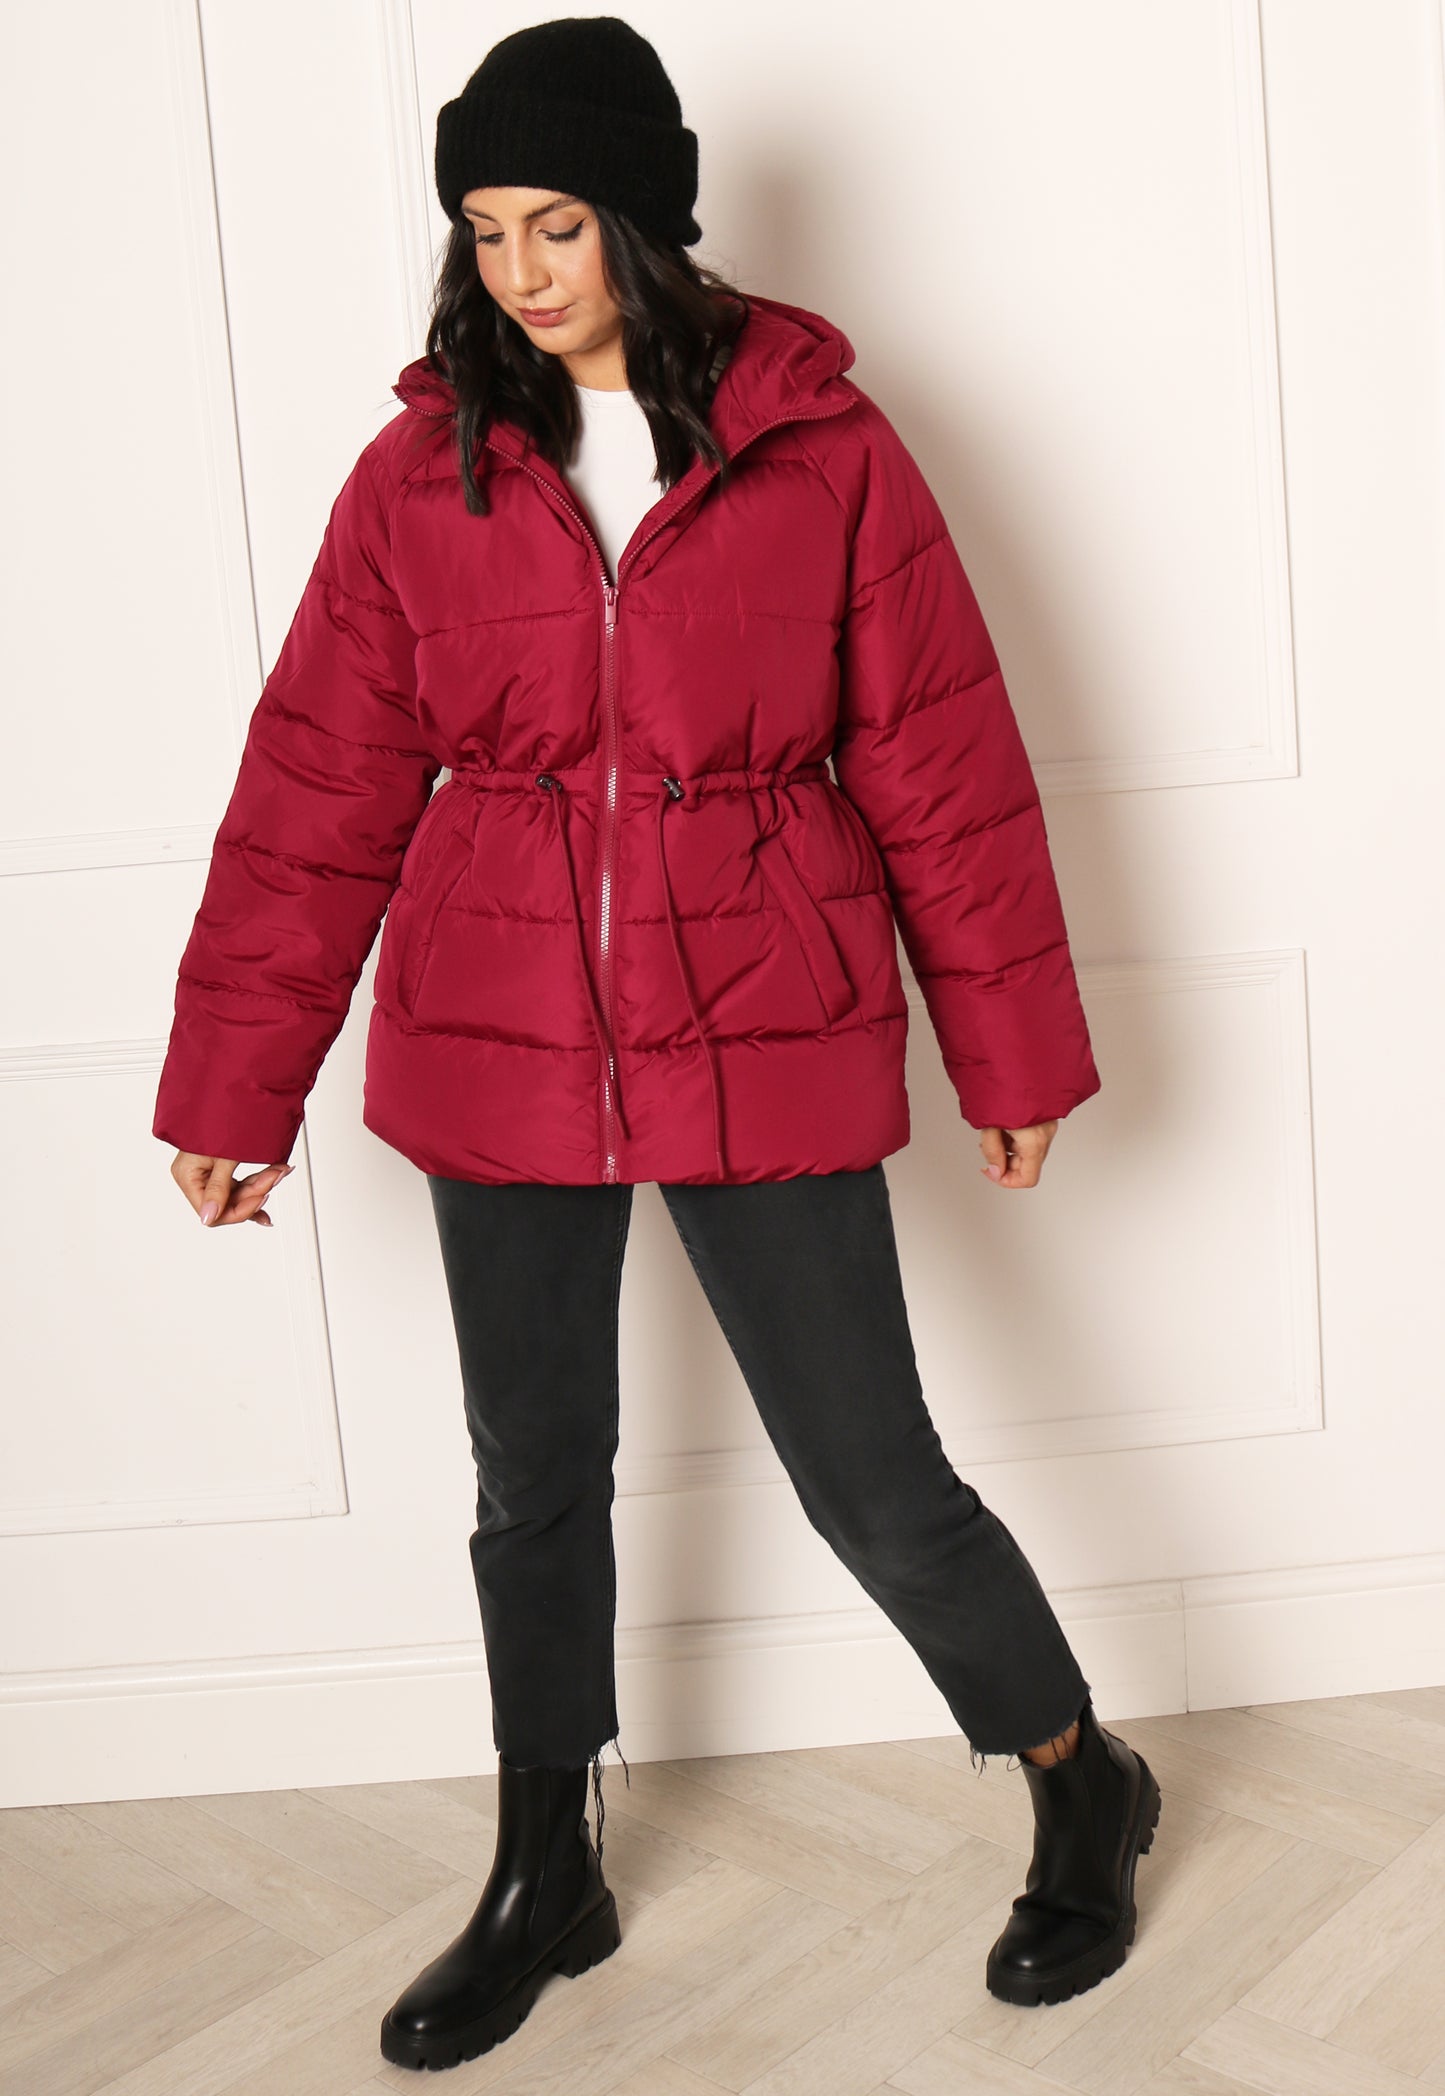 VILA Leana Longline Hooded Puffer Jacket with Tie Waist in Burgundy Red - One Nation Clothing